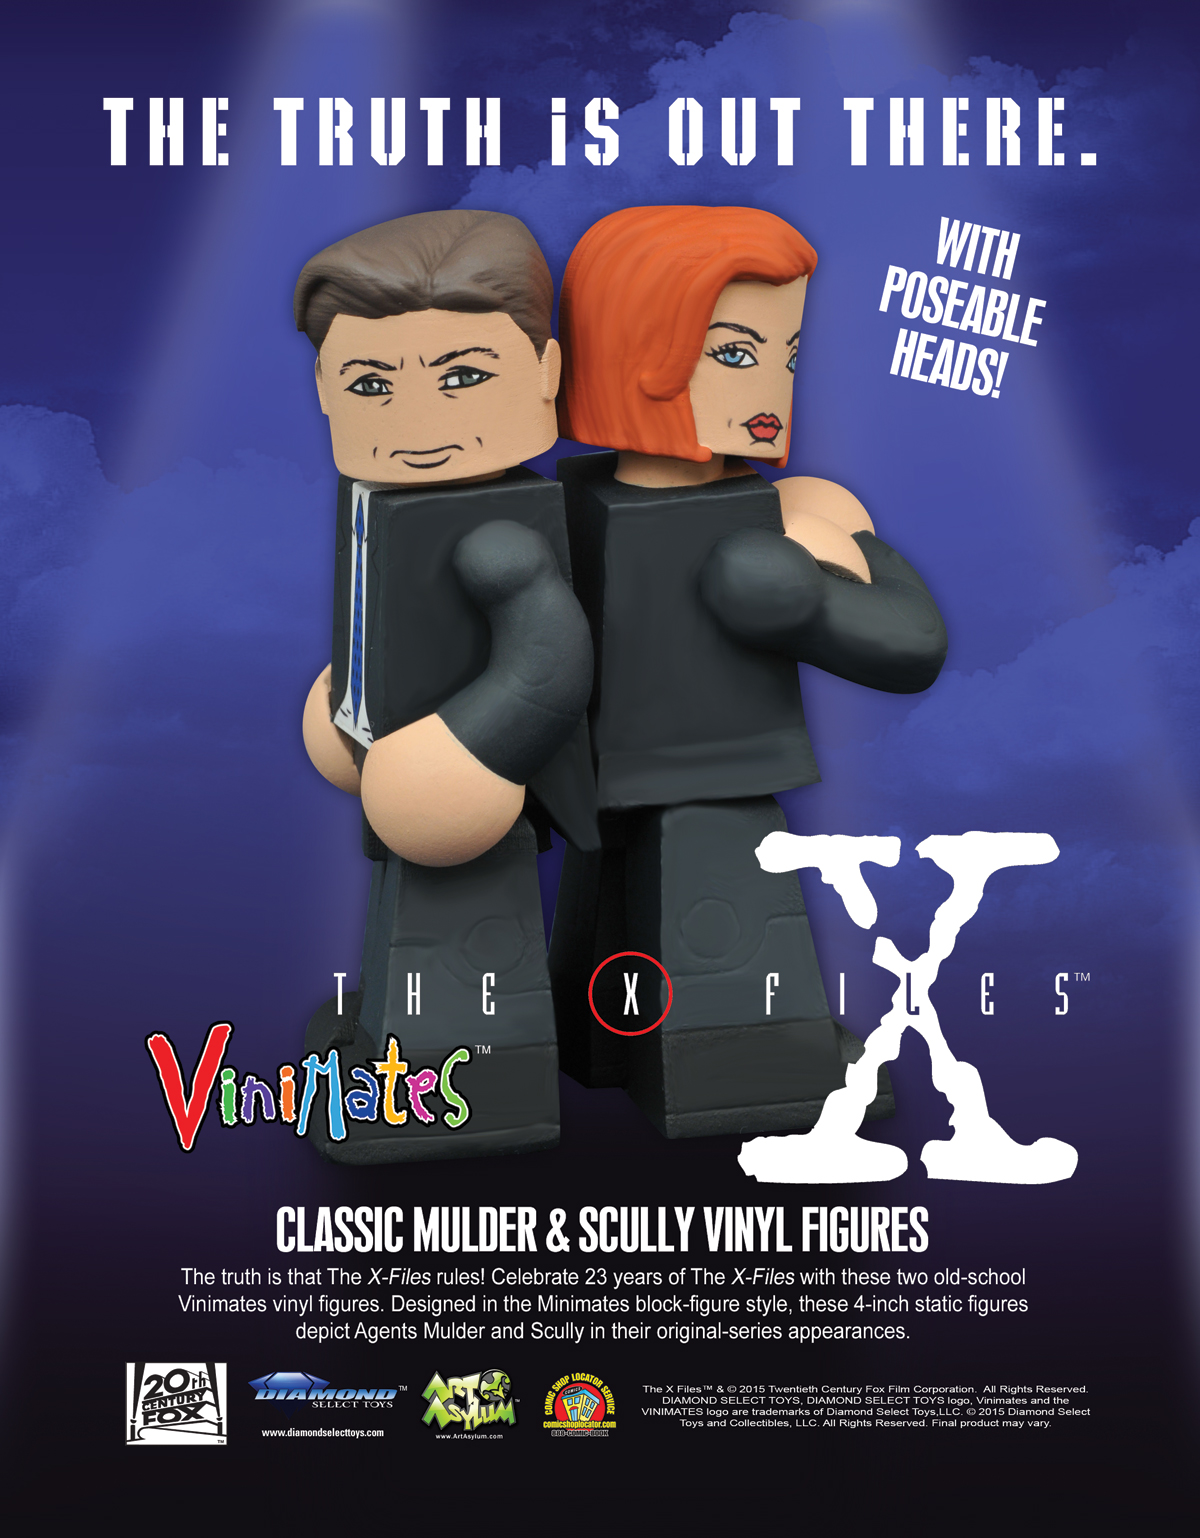 The X-Files Minimates Fox Mulder & Dana Scully 2-Pack 